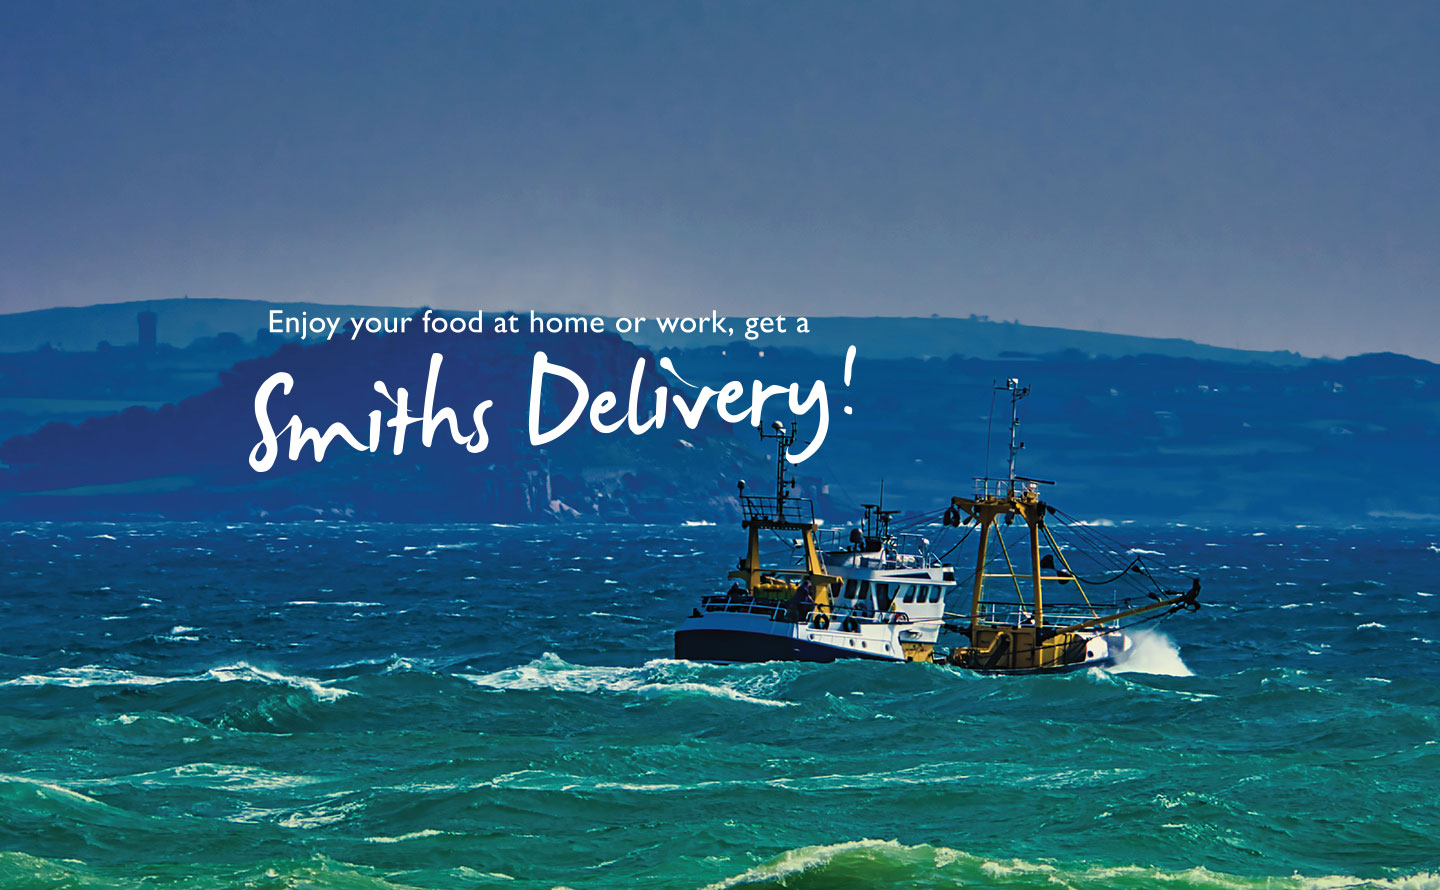 Smiths Delivery